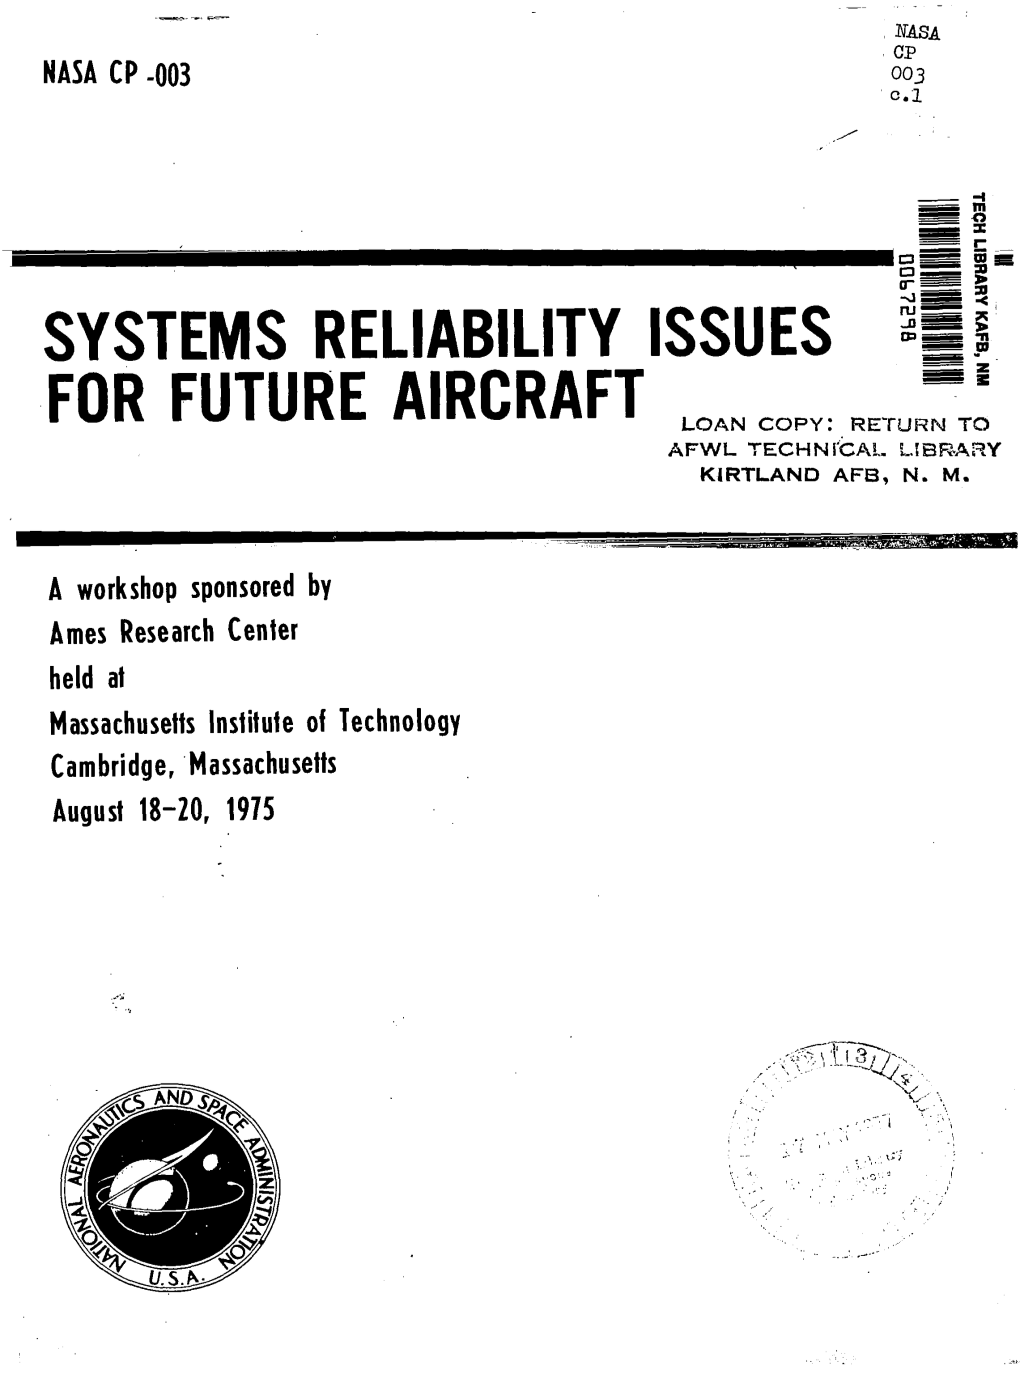 Systems Reliability Issues ----111- "-B